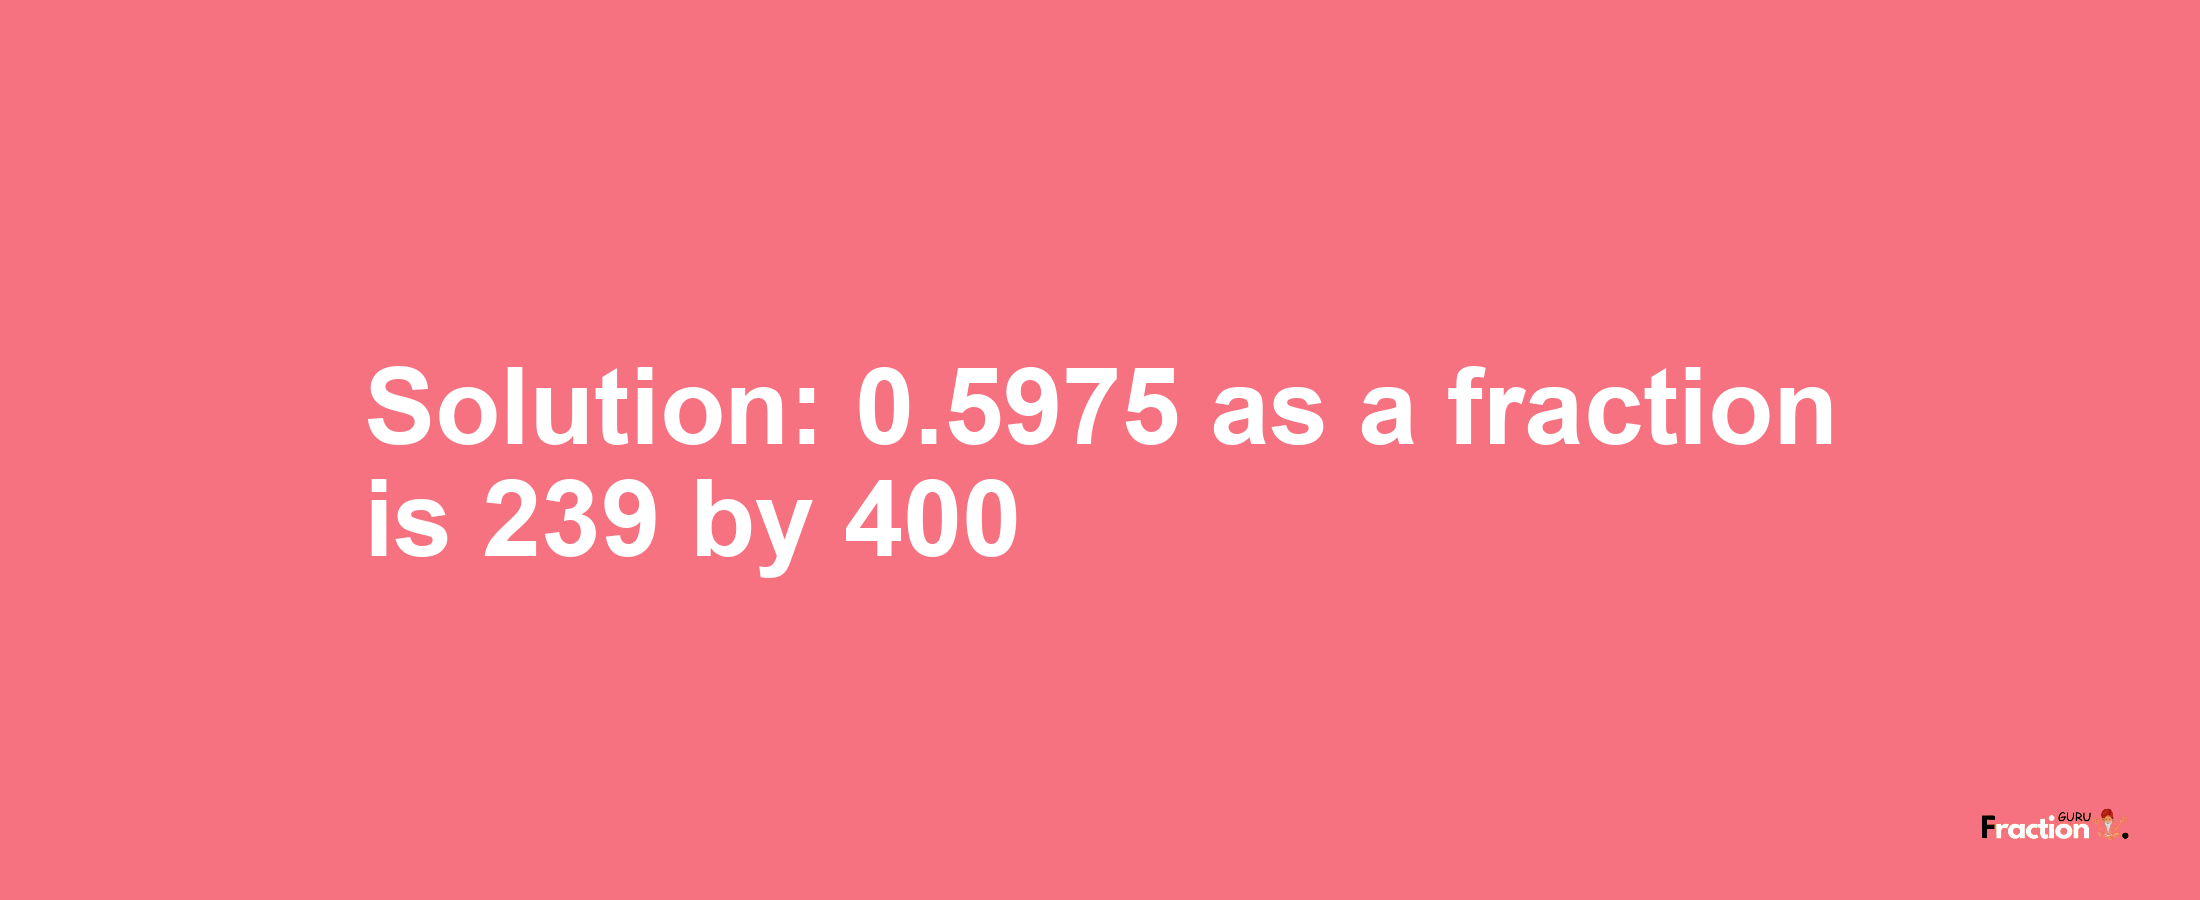 Solution:0.5975 as a fraction is 239/400